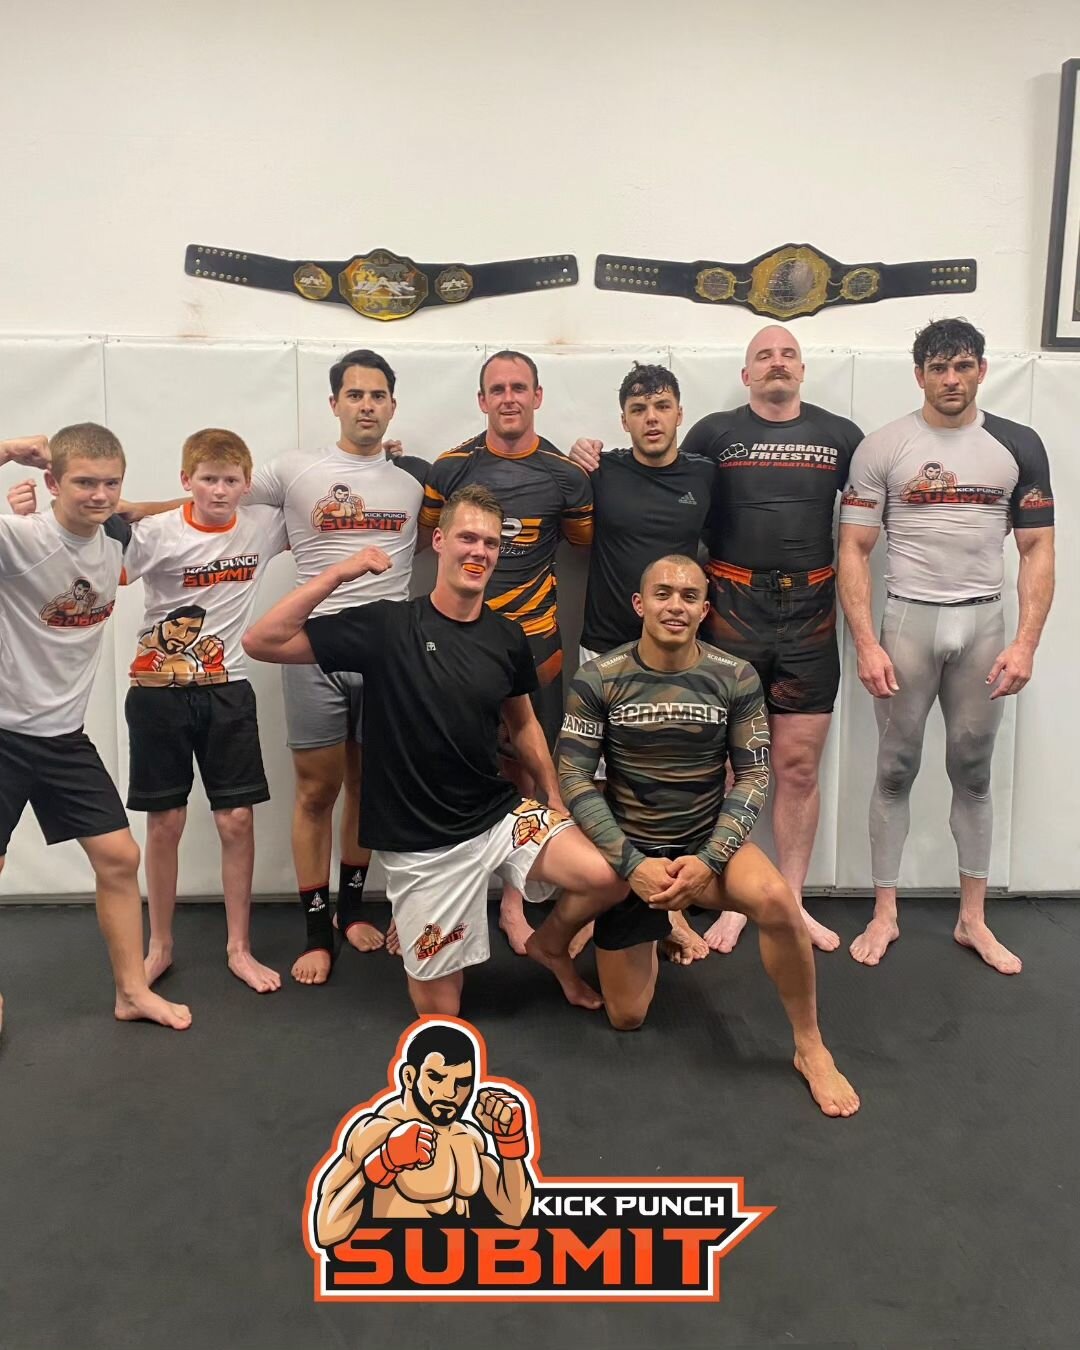 Monday night submission grappling! Coached by Joaco!! Come get involved with us and start your 7 day free trial today!